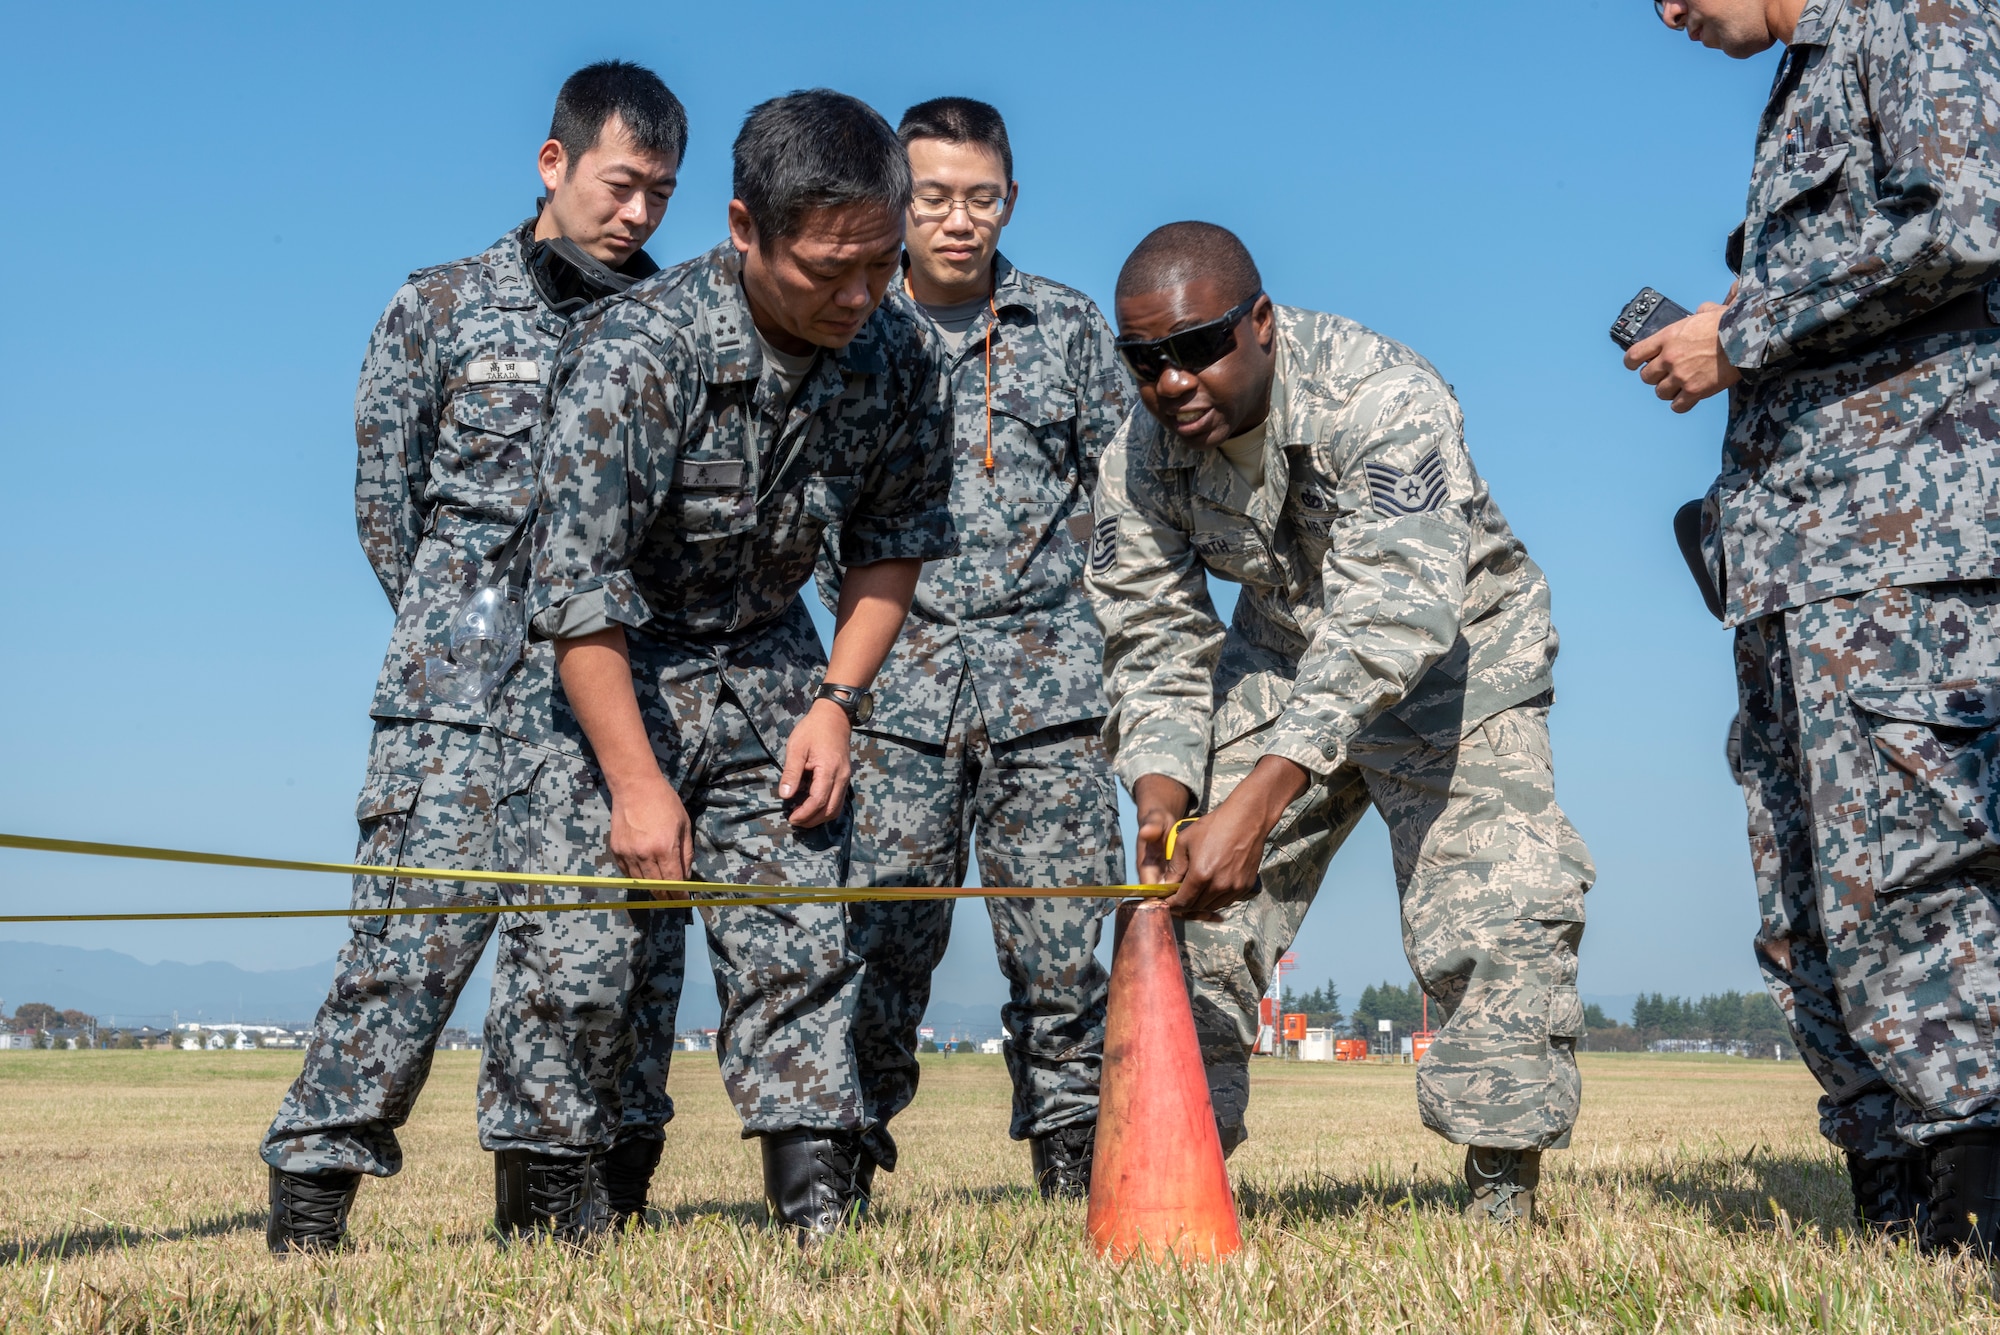 U.S. Air Force Tech. Sgt. Romain Smith, 374th Civil Engineer Squadron electrical power production, works with members of the Koku Jietai (Japan Air Self-Defense Force) members to measure out the proper positioning for the Mobile Aircraft Arresting System (MAAS) at a bilateral training event at Yokota Air Base, Japan, Oct. 25, 2018.